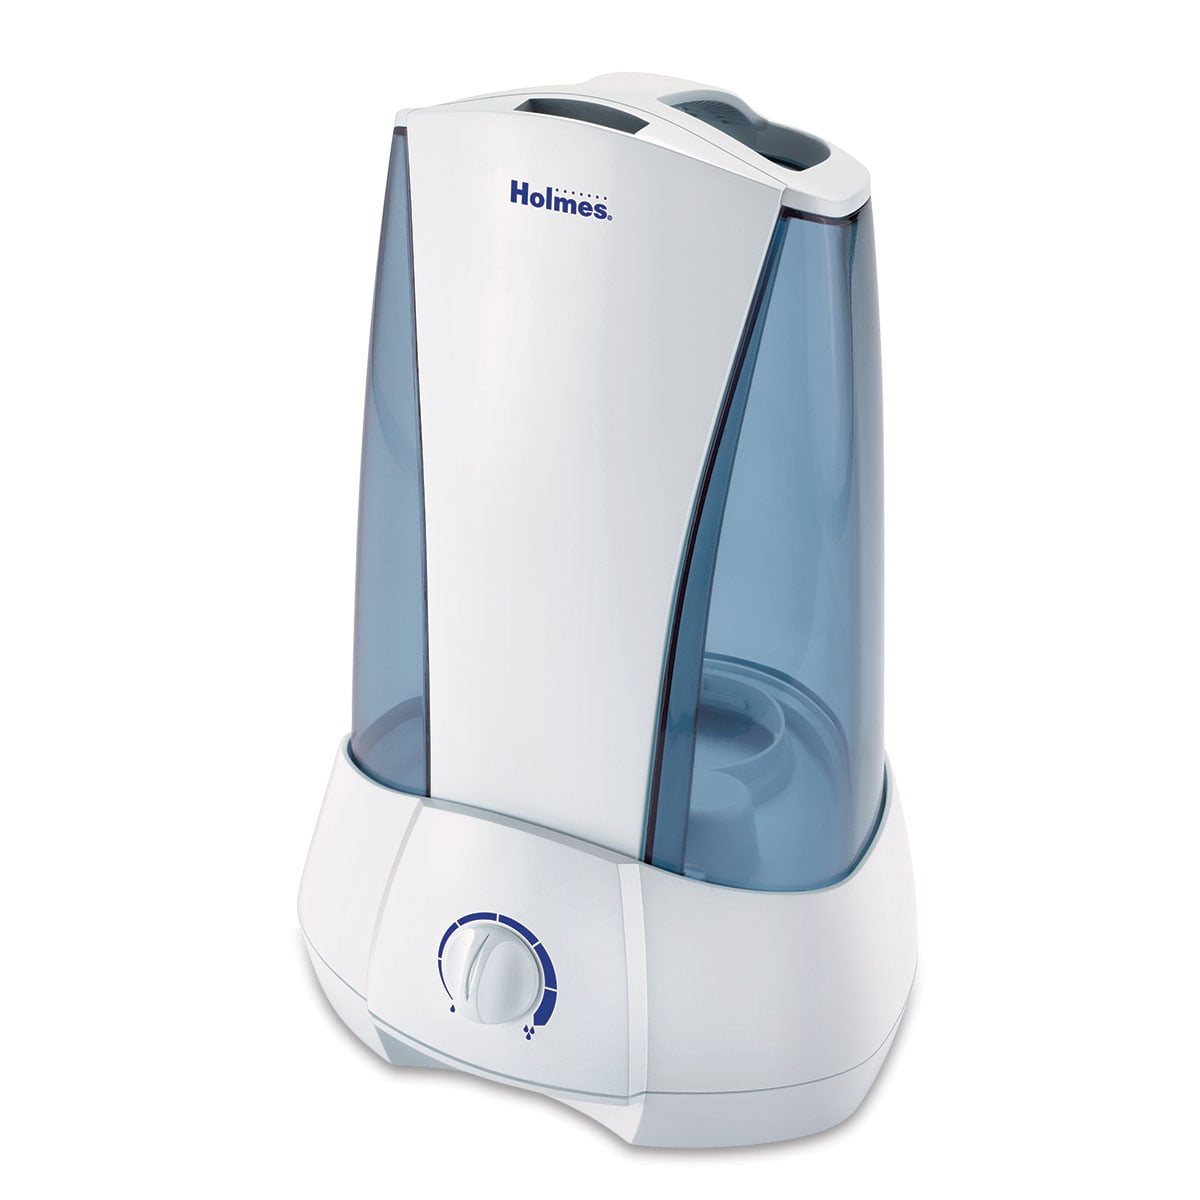 Holmes Ultrasonic Humidifier with Variable Mist Control - Walmart.com